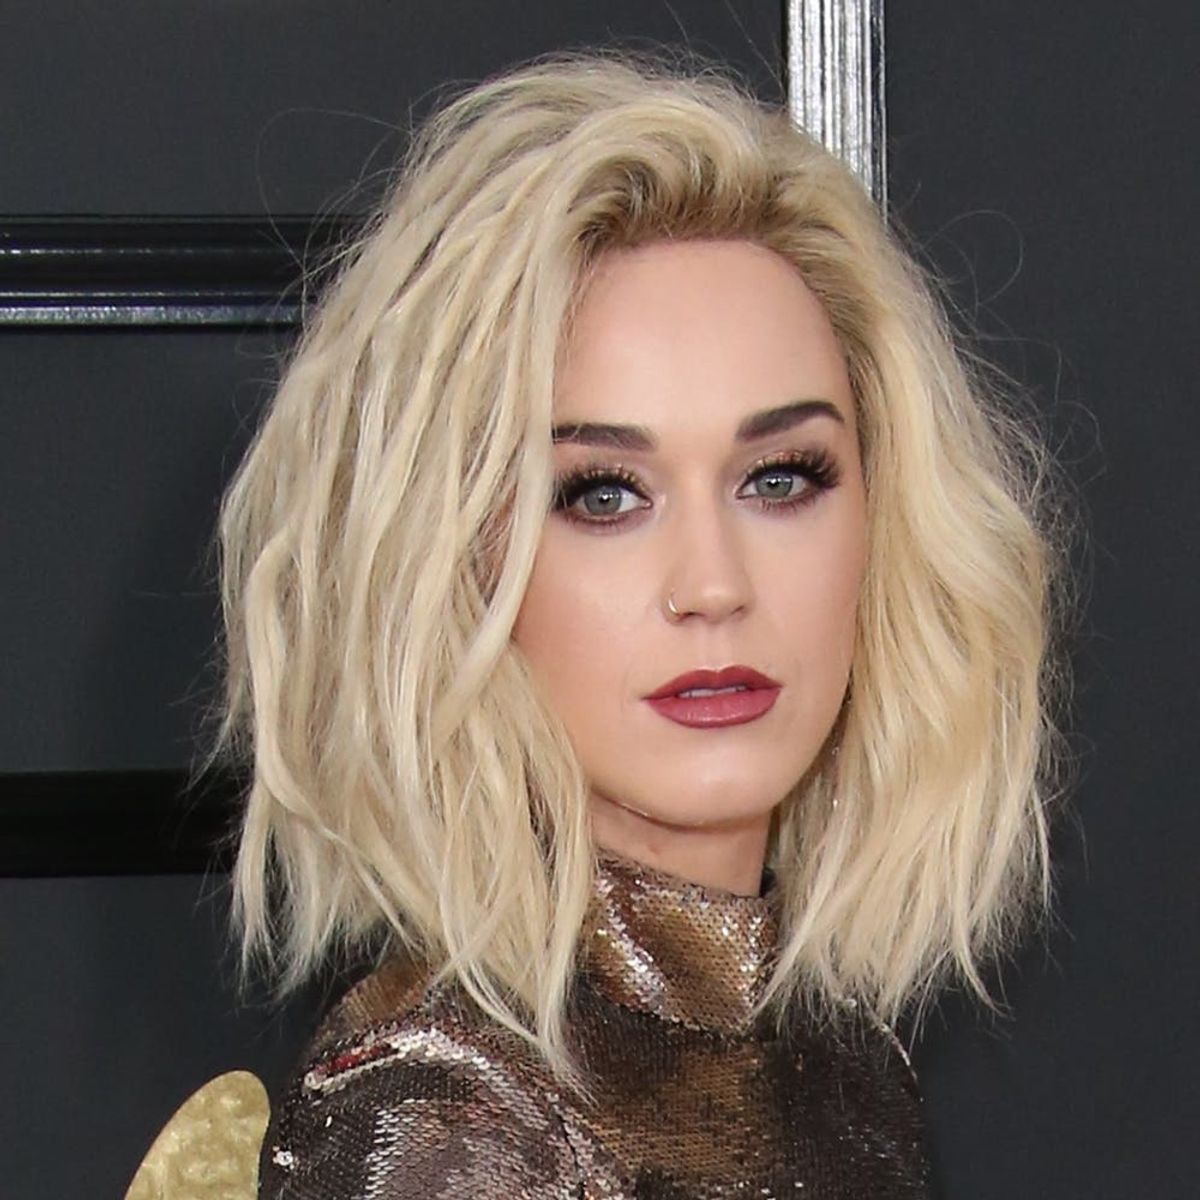 You’ll Hardly Recognize Katy Perry As a Super Short Platinum Blonde